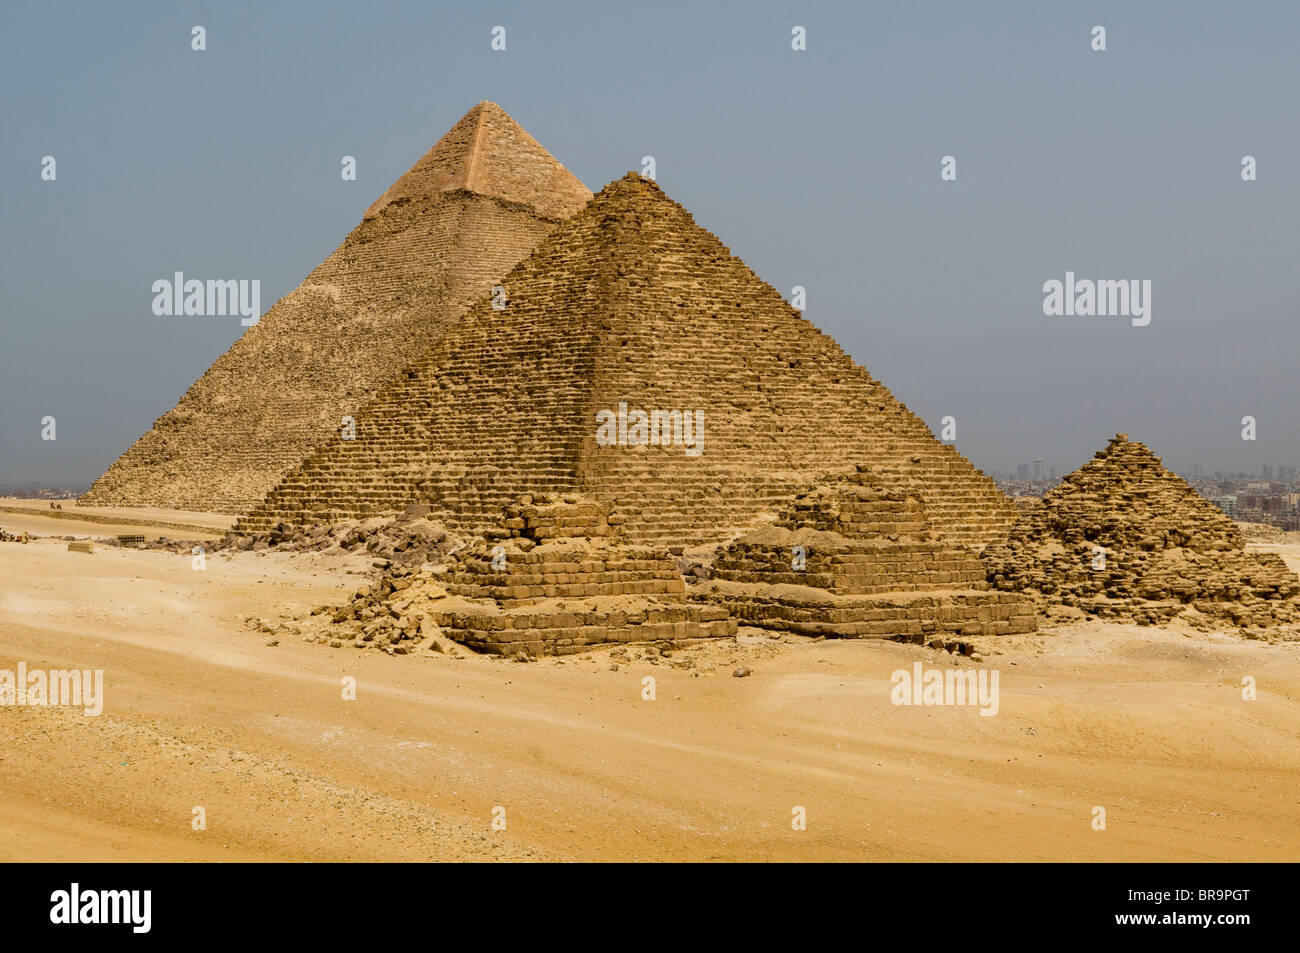 the Great Pyramids of Giza in Cairo Egypt Stock Photo